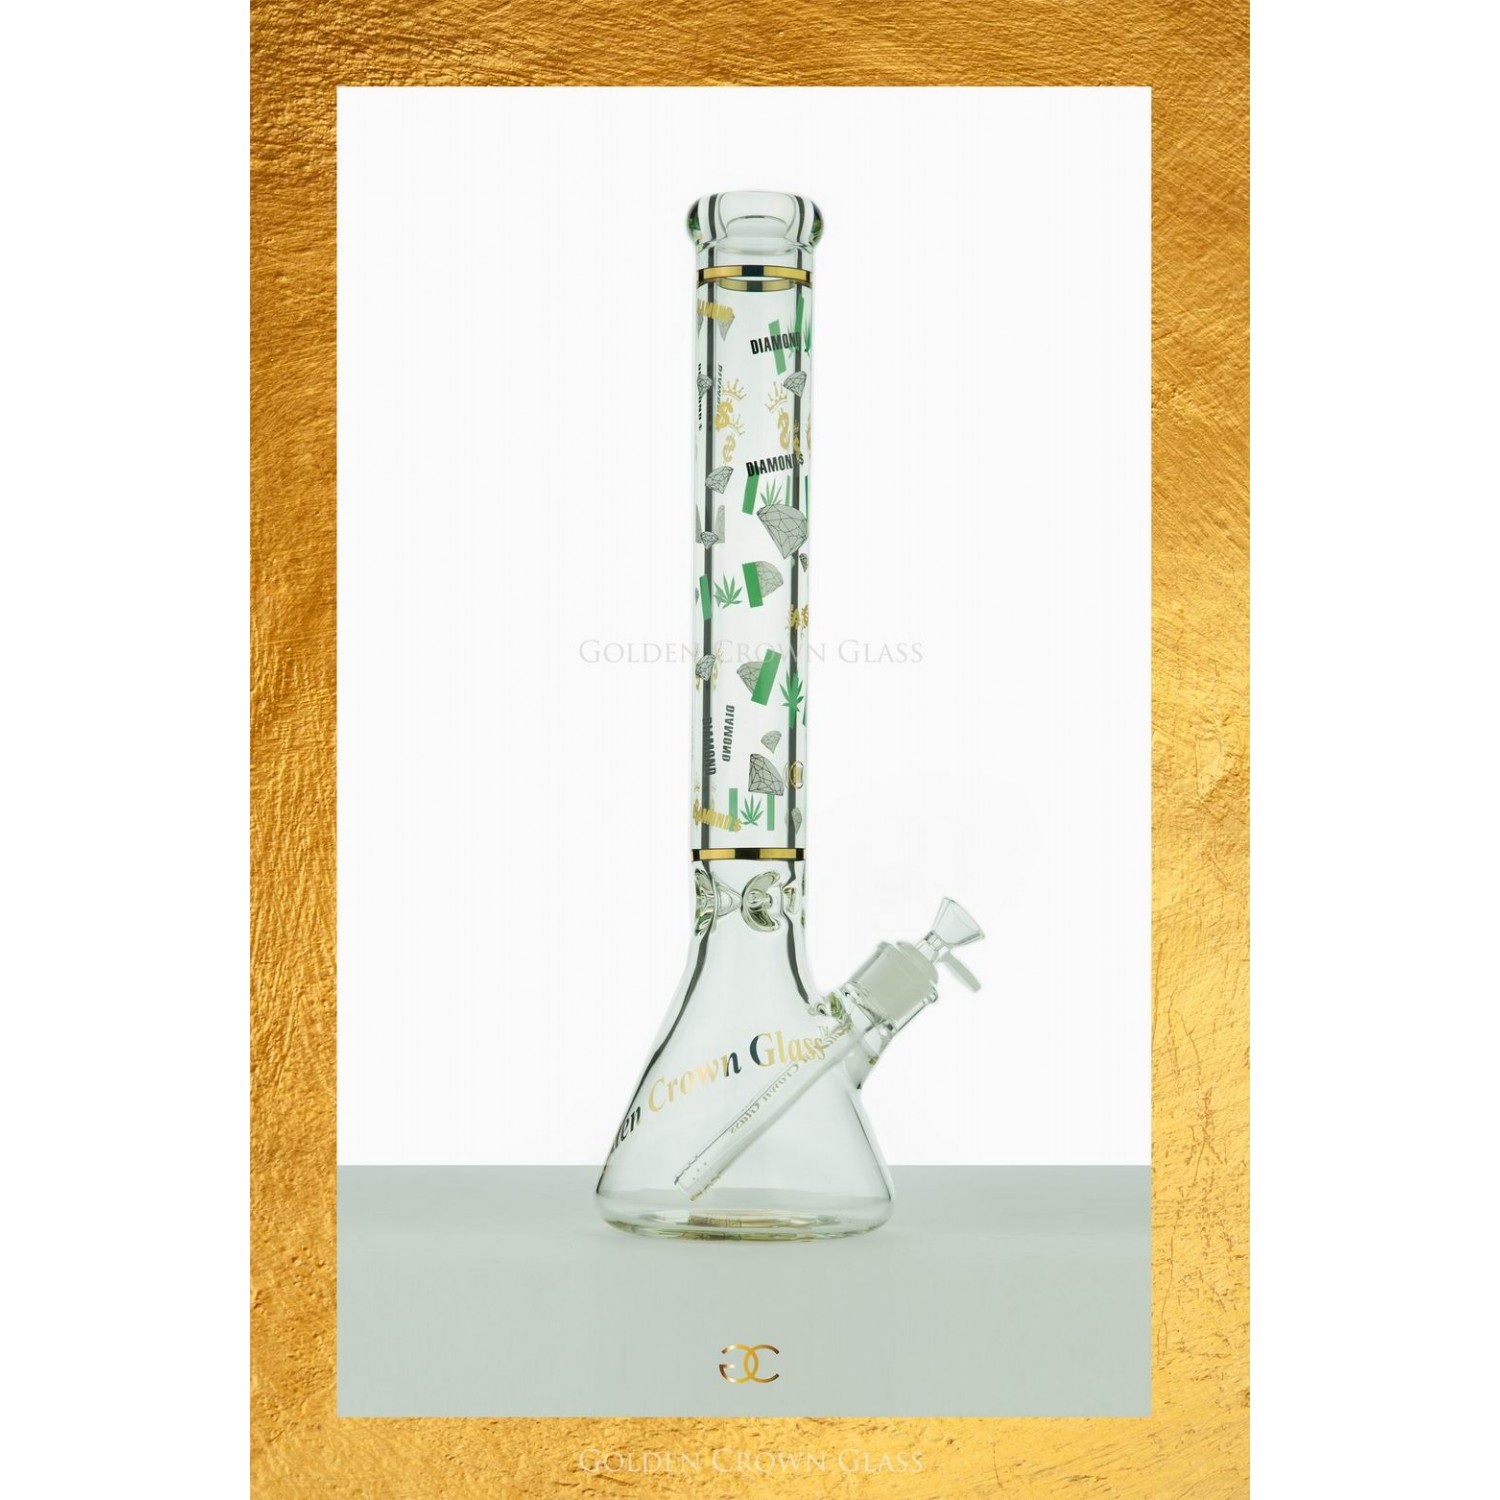 The Herb Diamond Waterpipe 18" by GOLDEN CROWN